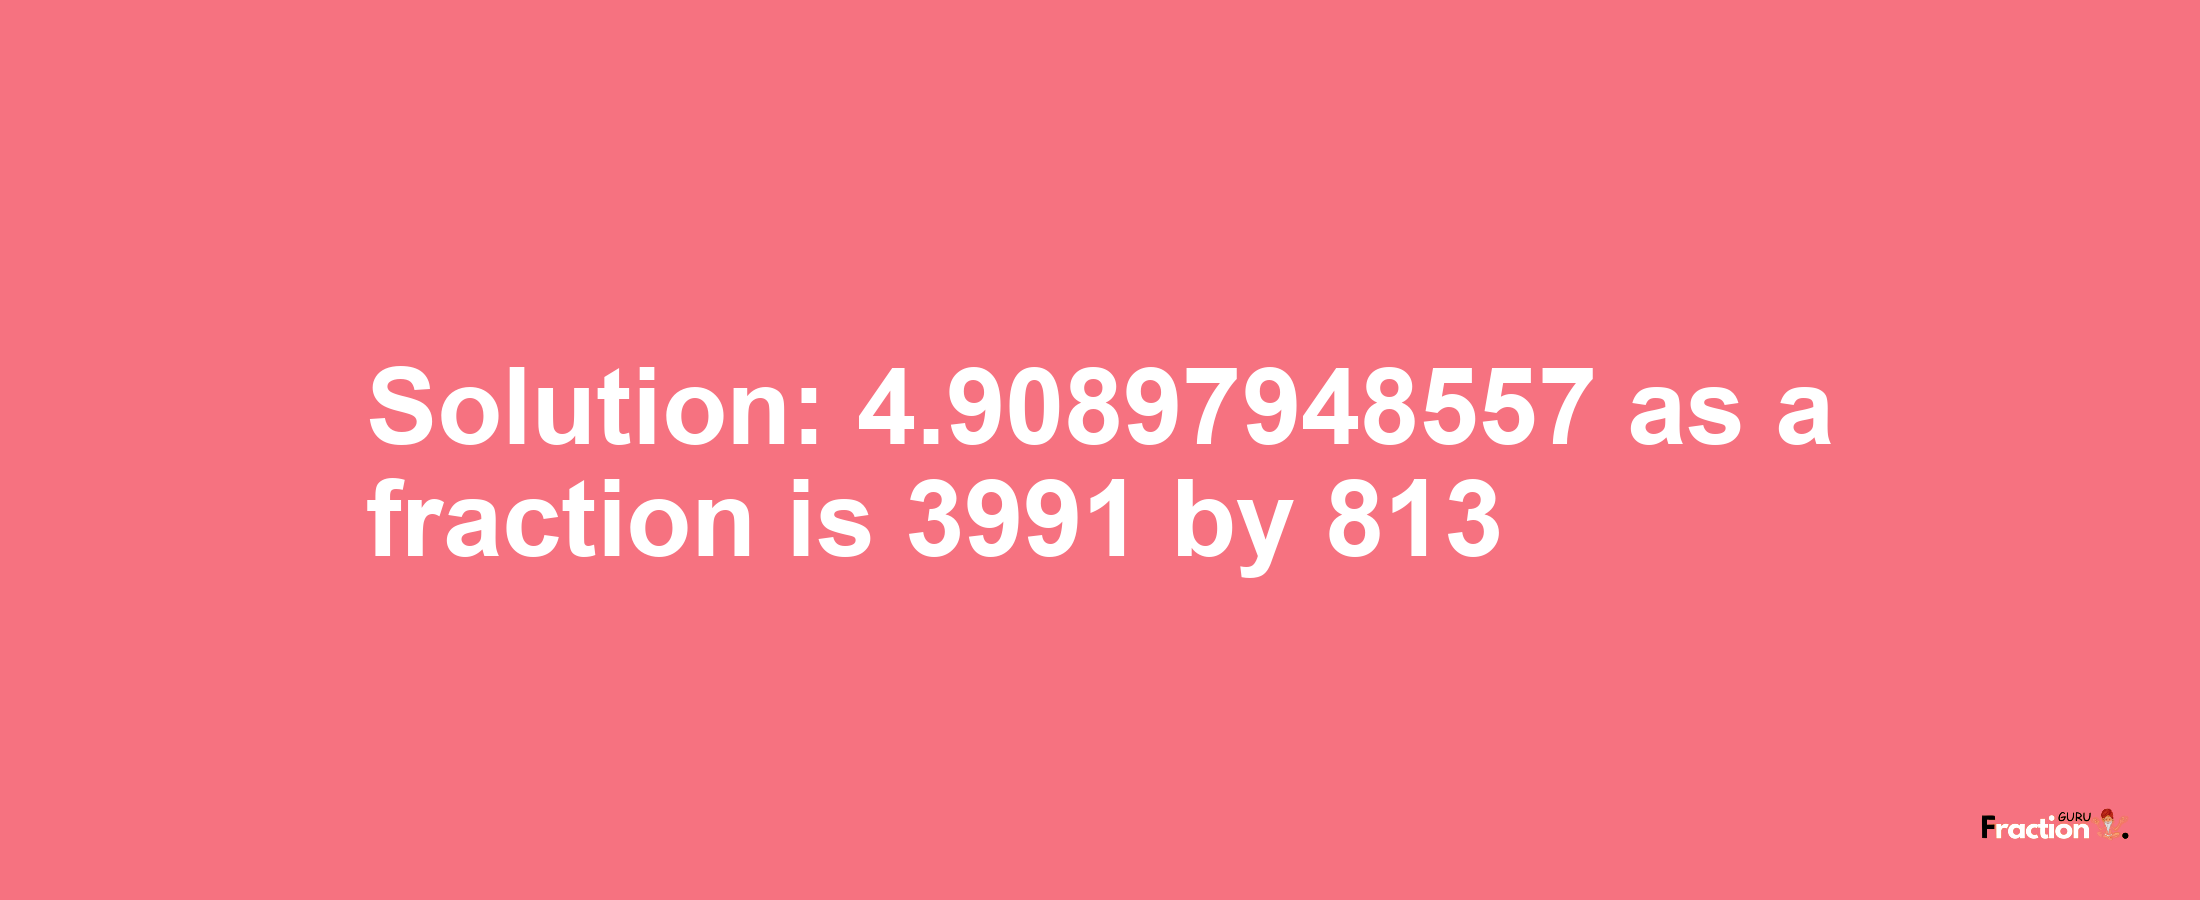 Solution:4.90897948557 as a fraction is 3991/813